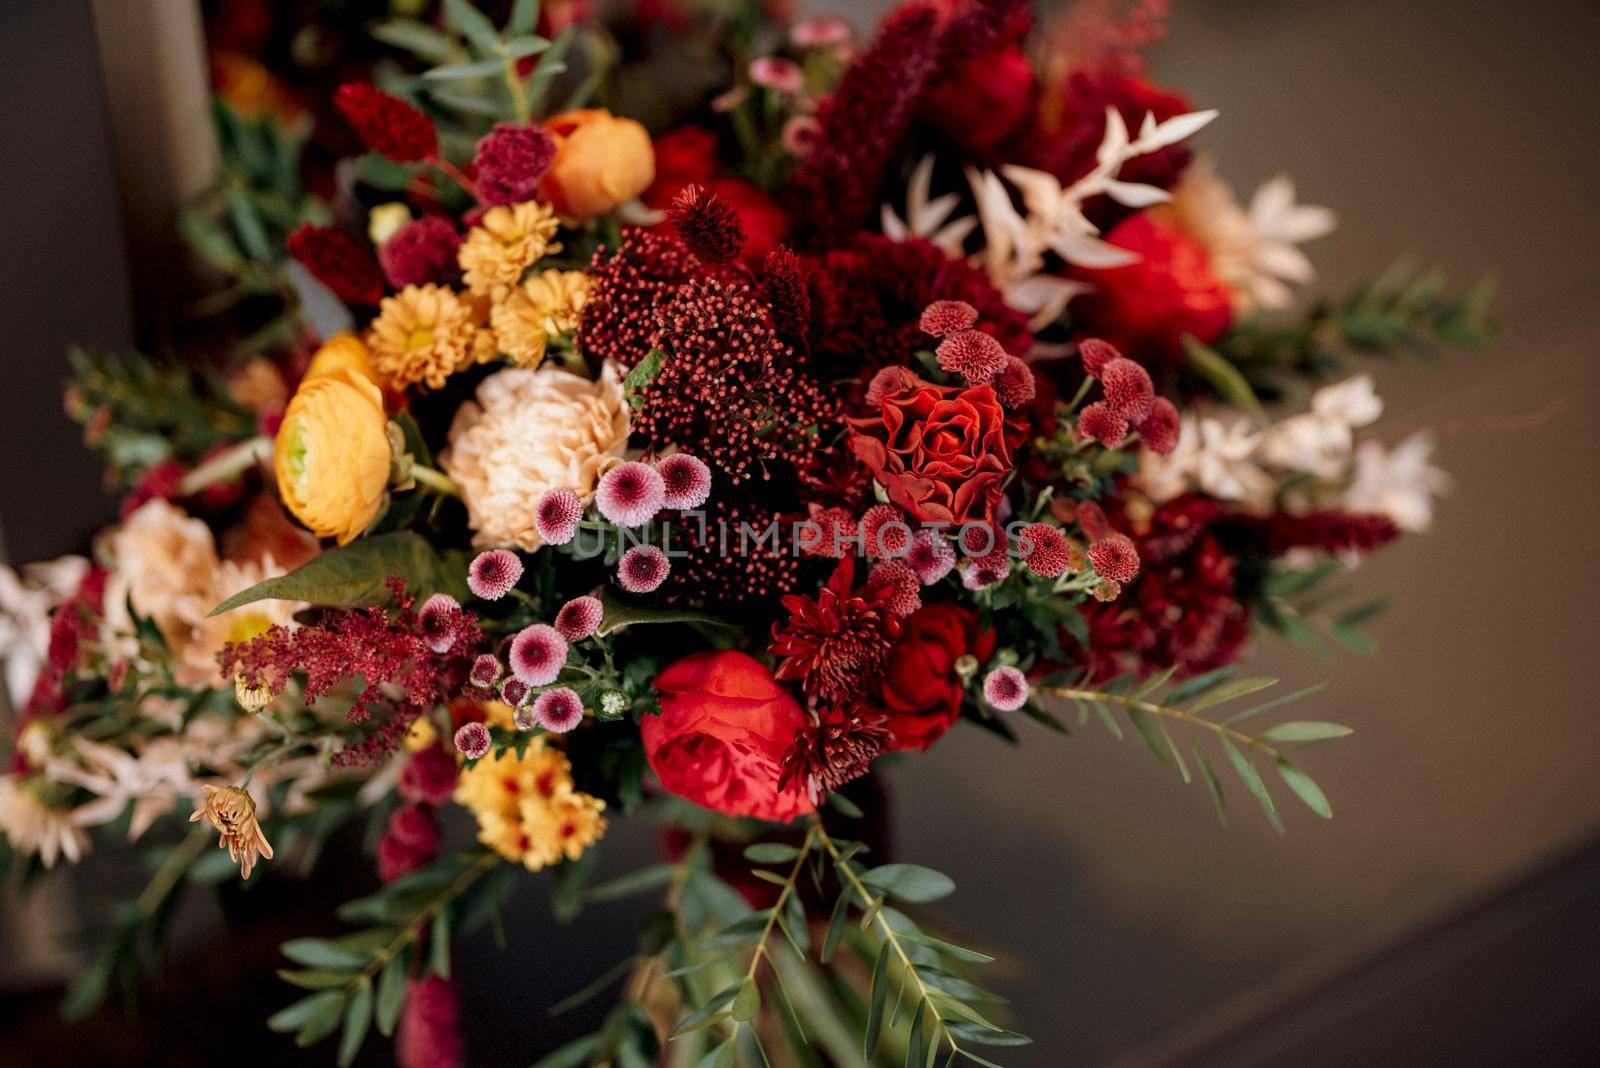 red elegant wedding bouquet of fresh natural flowers and greenery